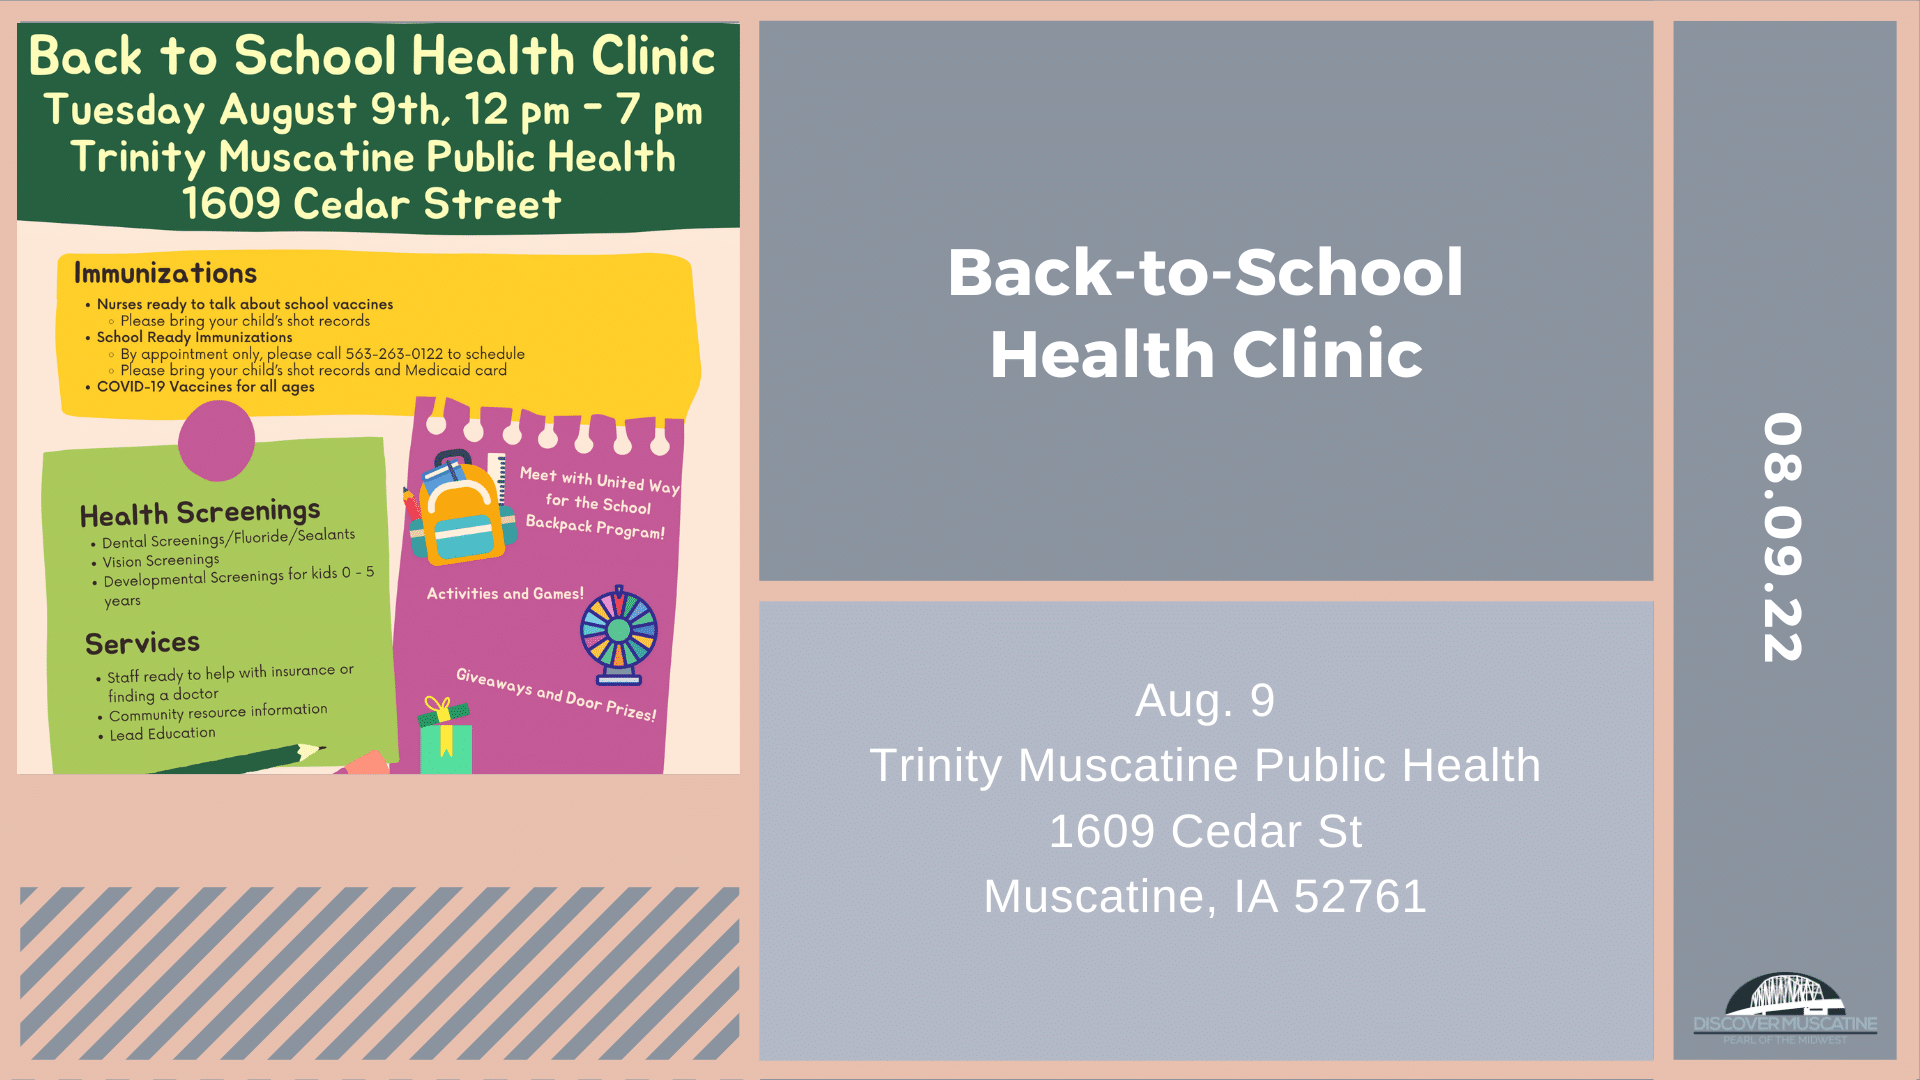 Back-to-School Health Clinic